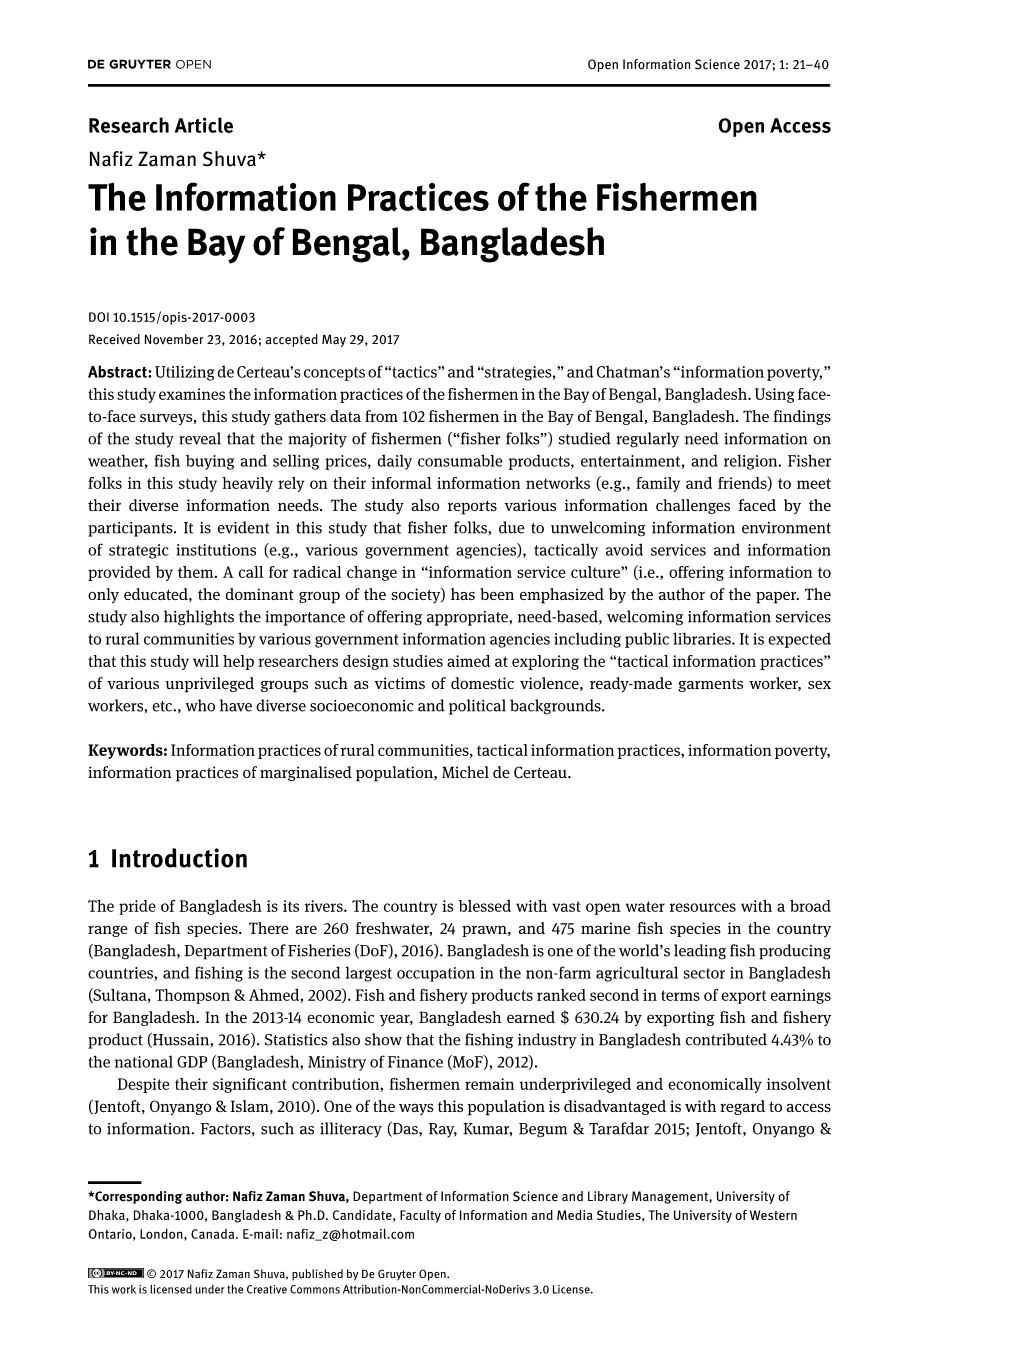 The Information Practices of the Fishermen in the Bay of Bengal, Bangladesh